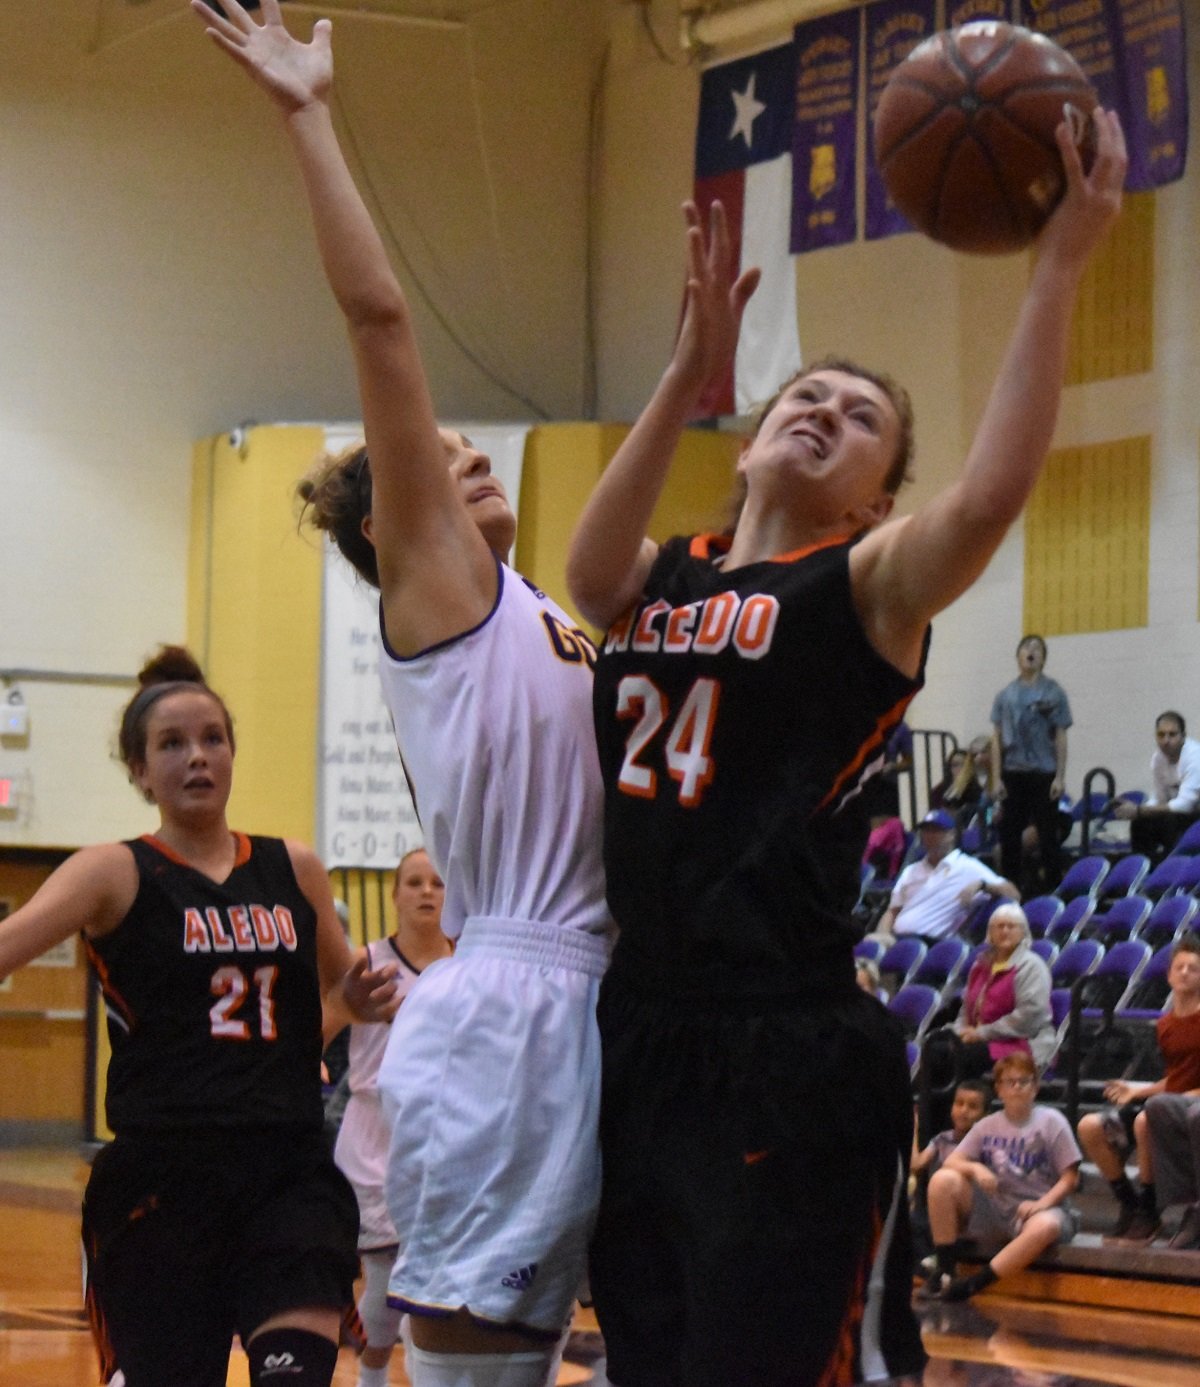 Aledo junior guard Reagan Brown aggressively drives to the basket during the Ladycats' 37-23 victory over Godley Tuesday night at Godley. Photo by Tony Eierdam